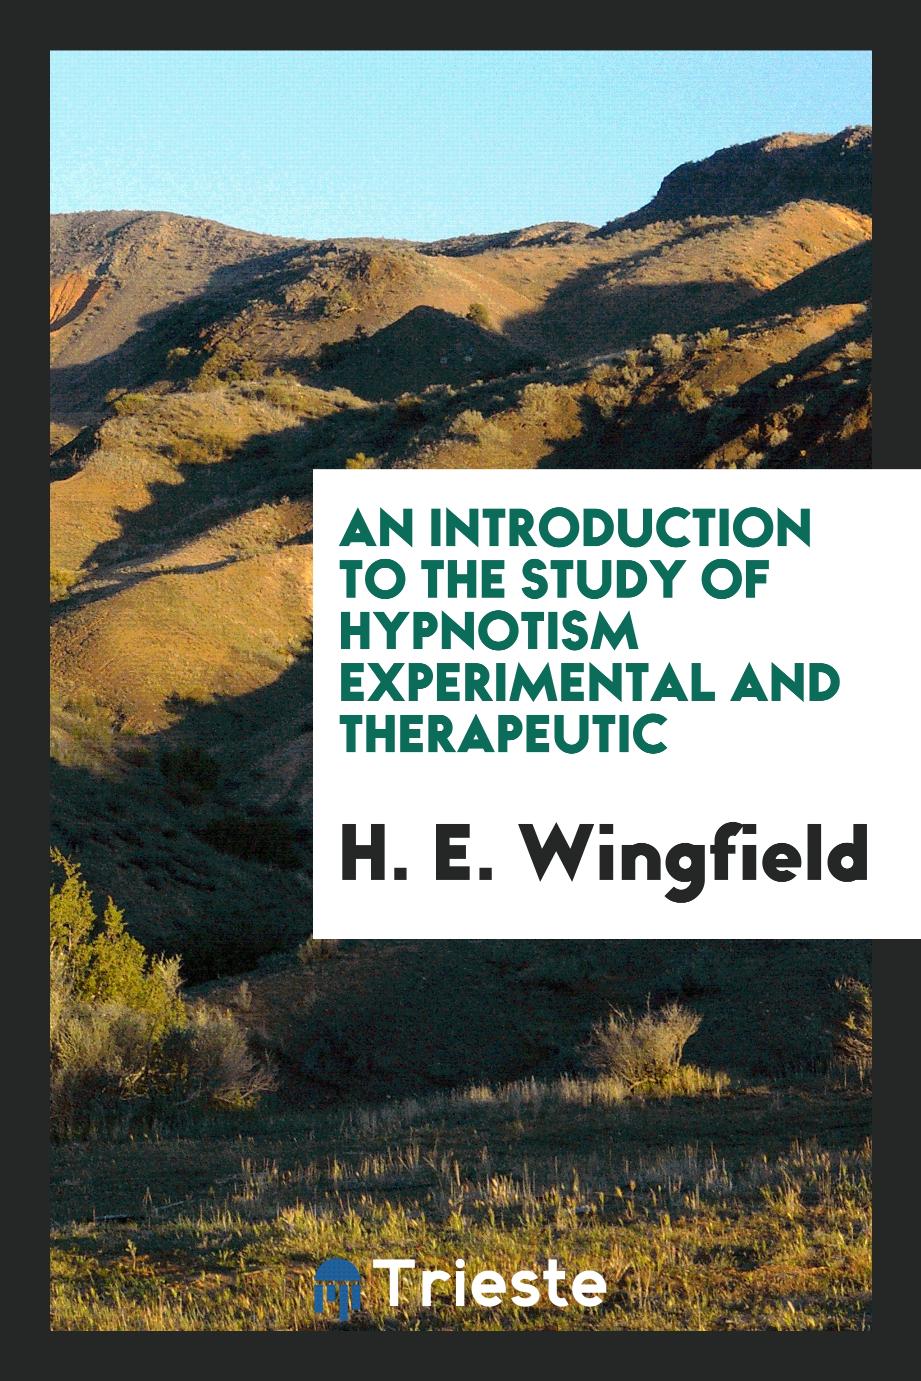 An introduction to the study of hypnotism experimental and therapeutic